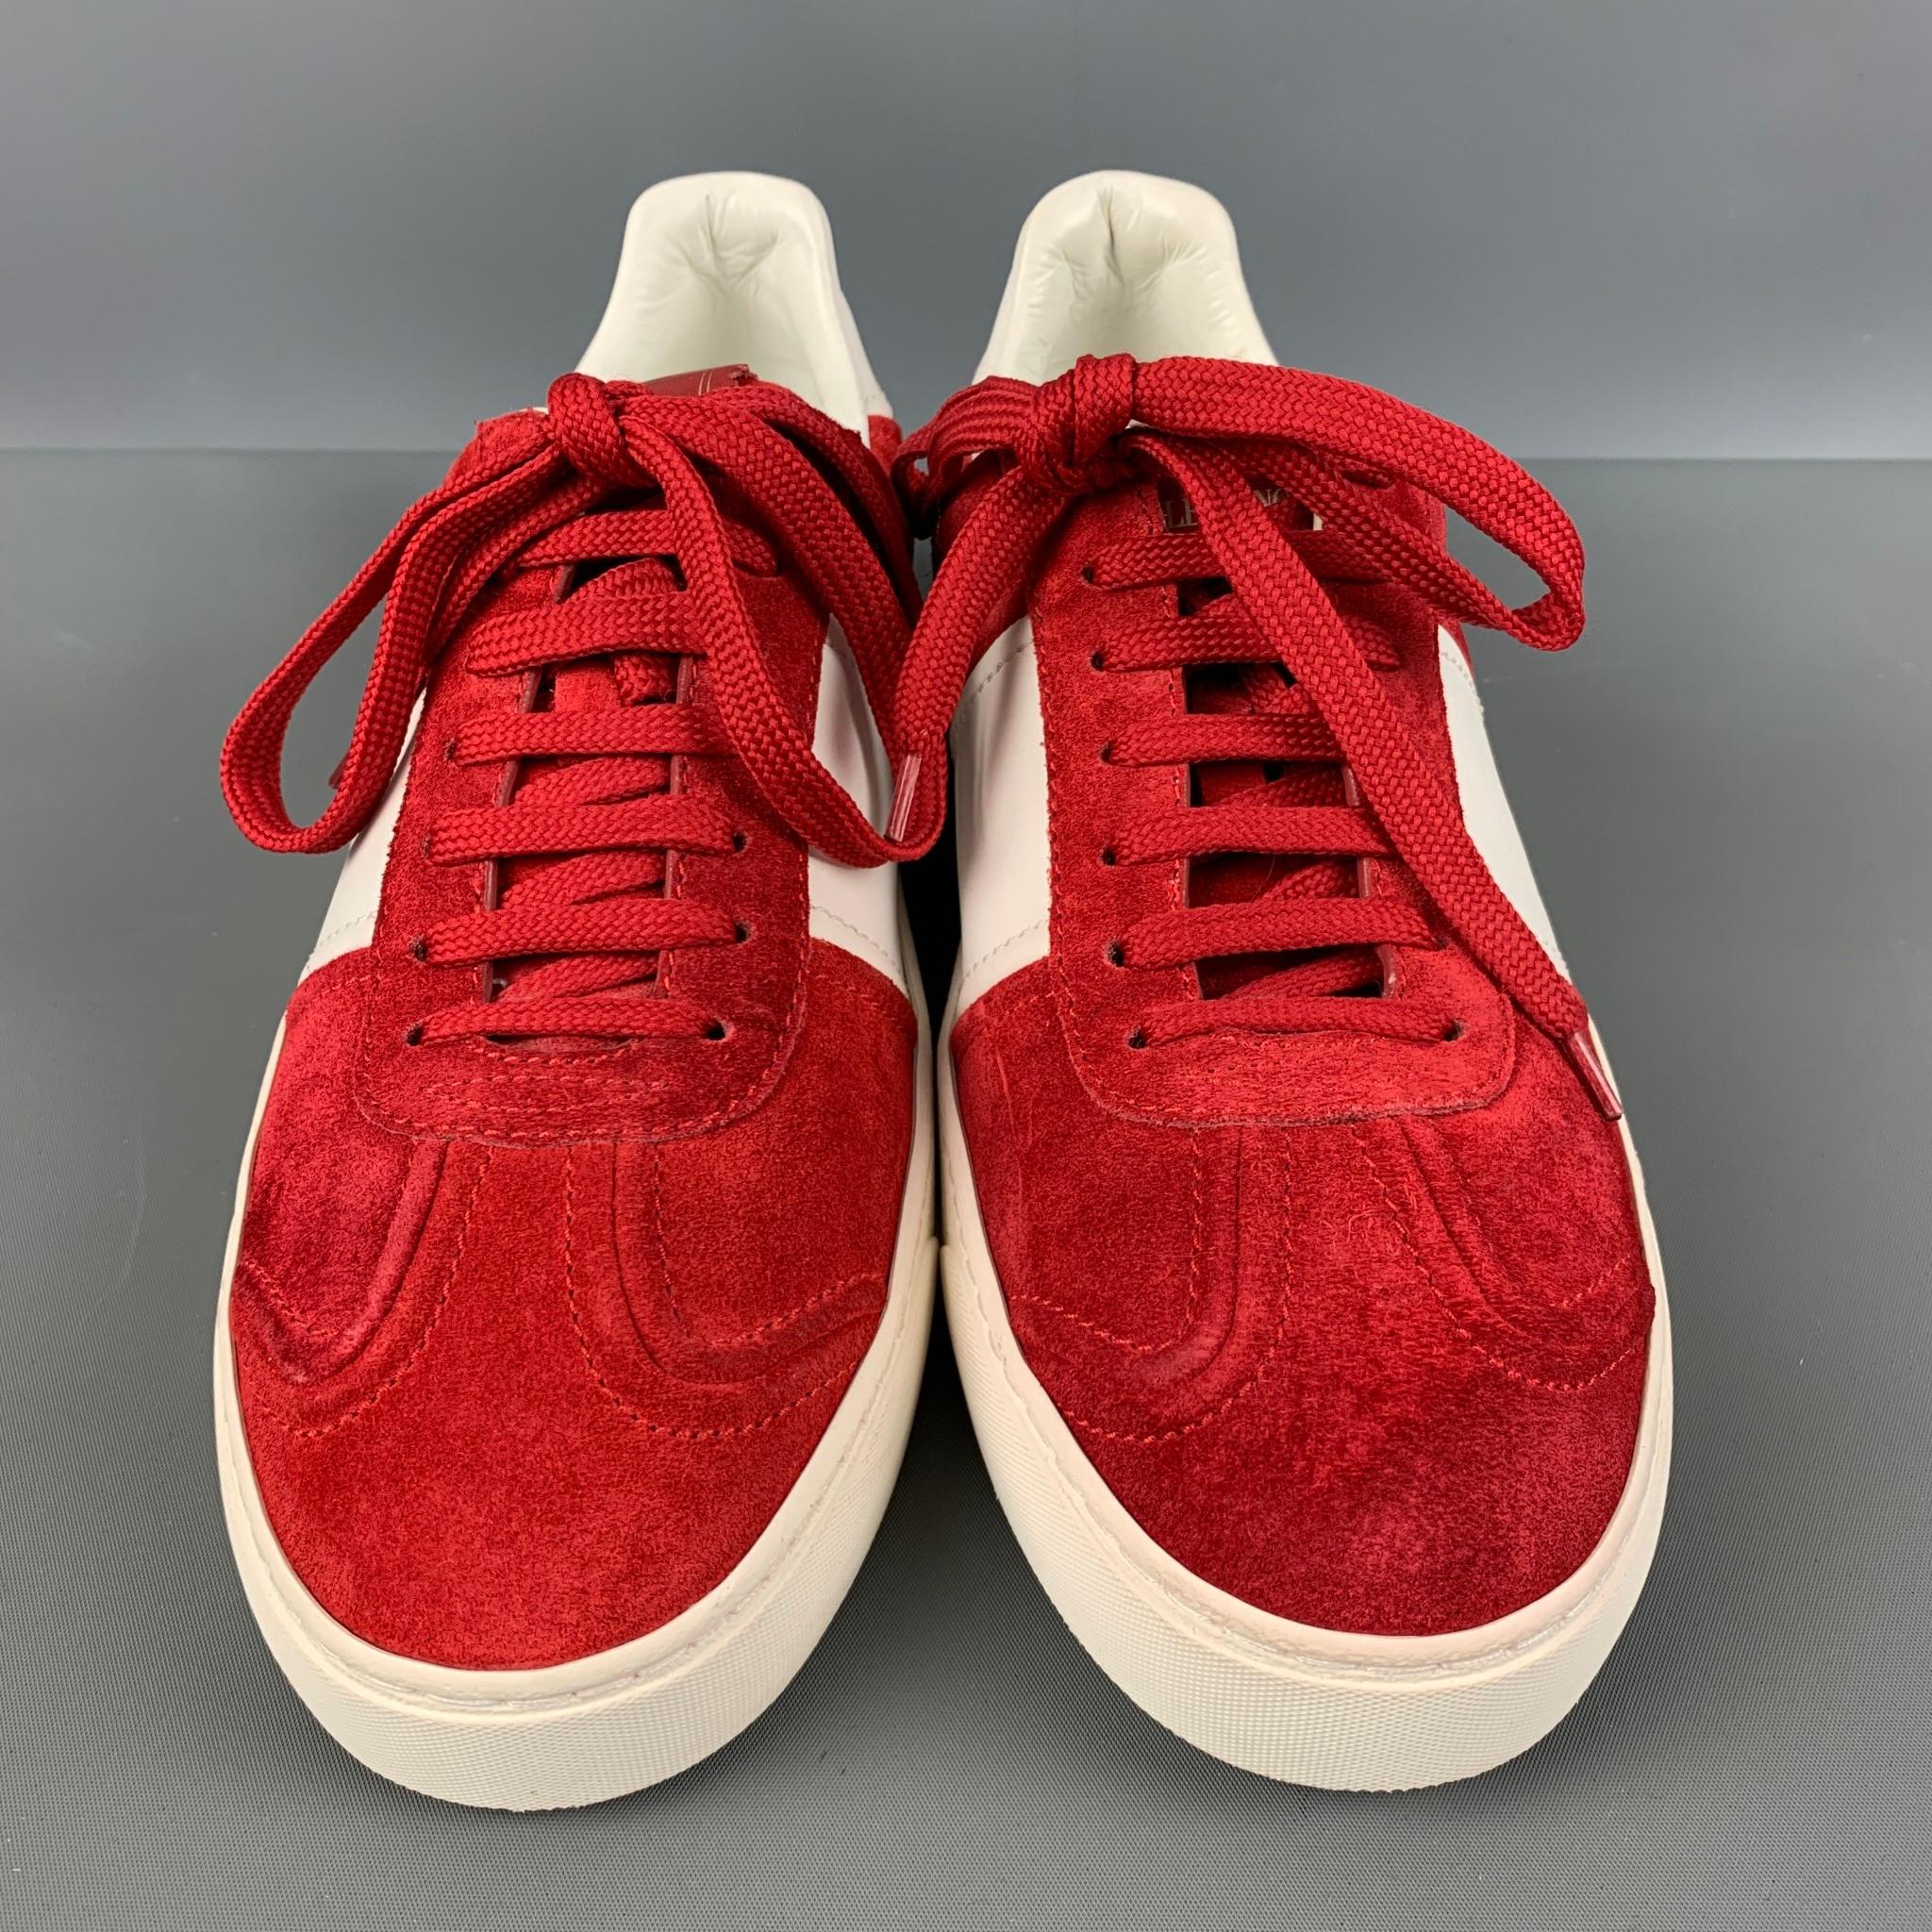 Men's VALENTINO 'City Planet Rockstud' Size 8 Red White Studded Suede Sneakers